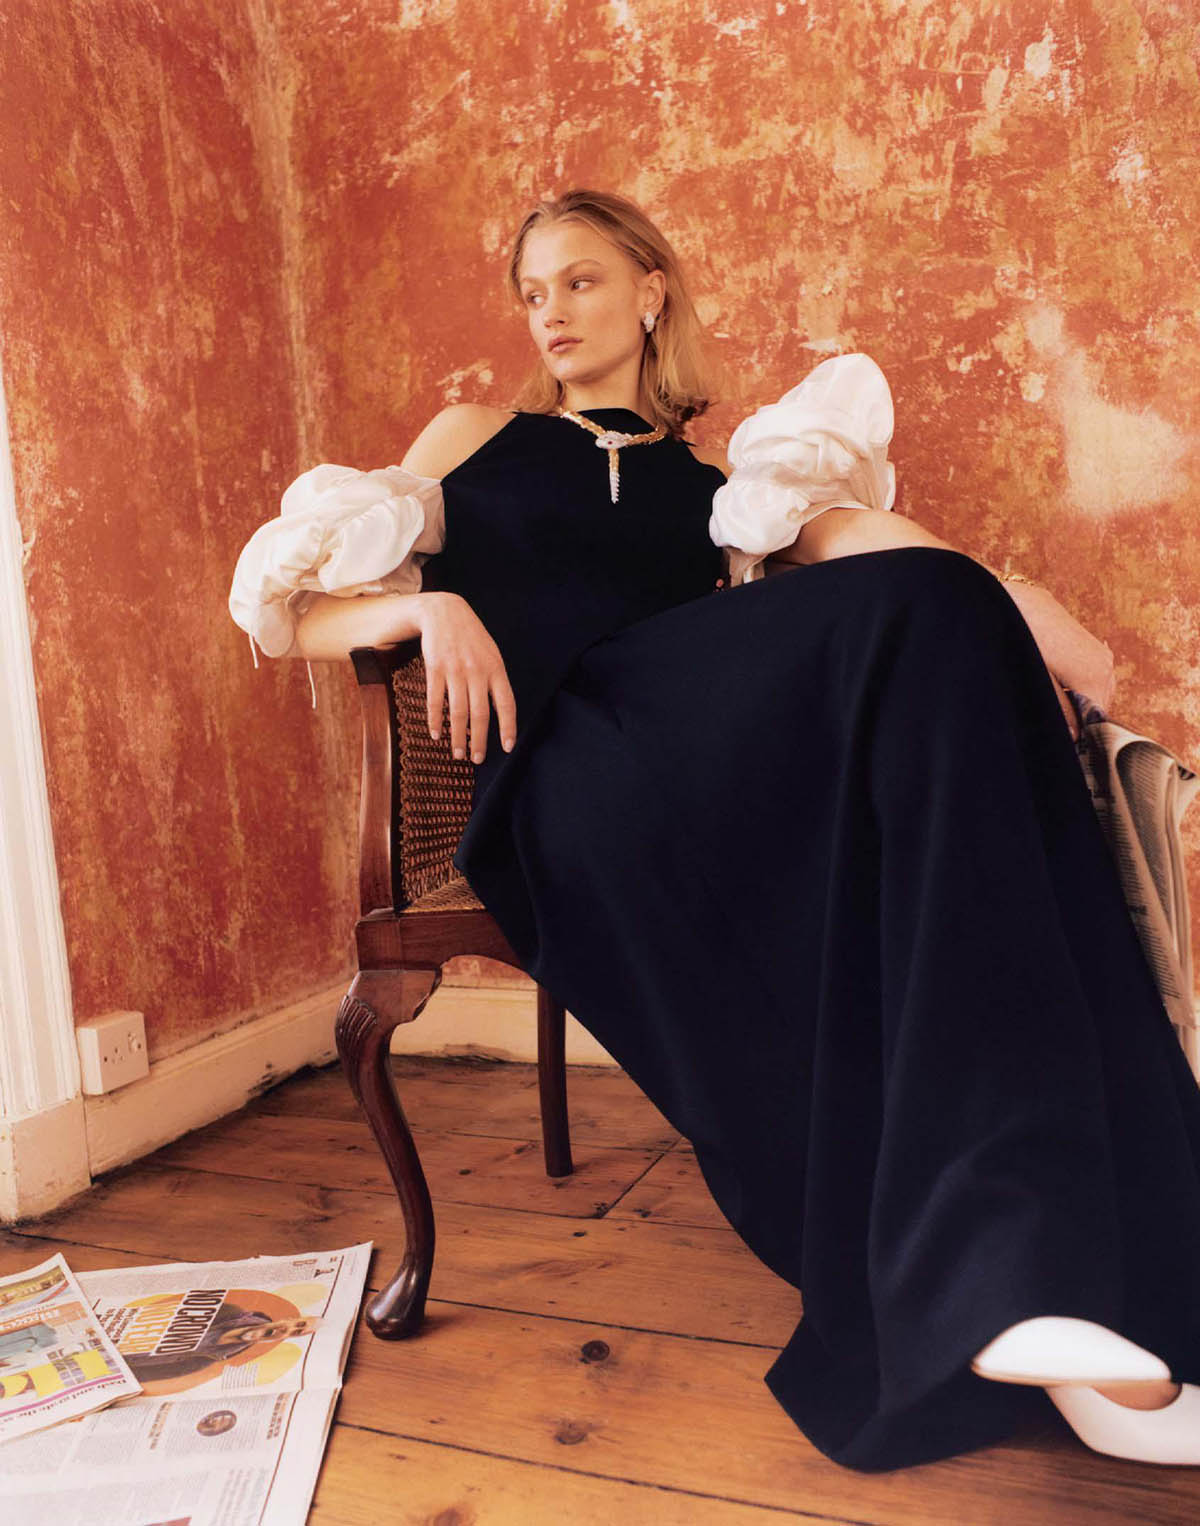 Harriet Longhurst by Juliette Cassidy for The Sunday Times Style March 7th, 2021